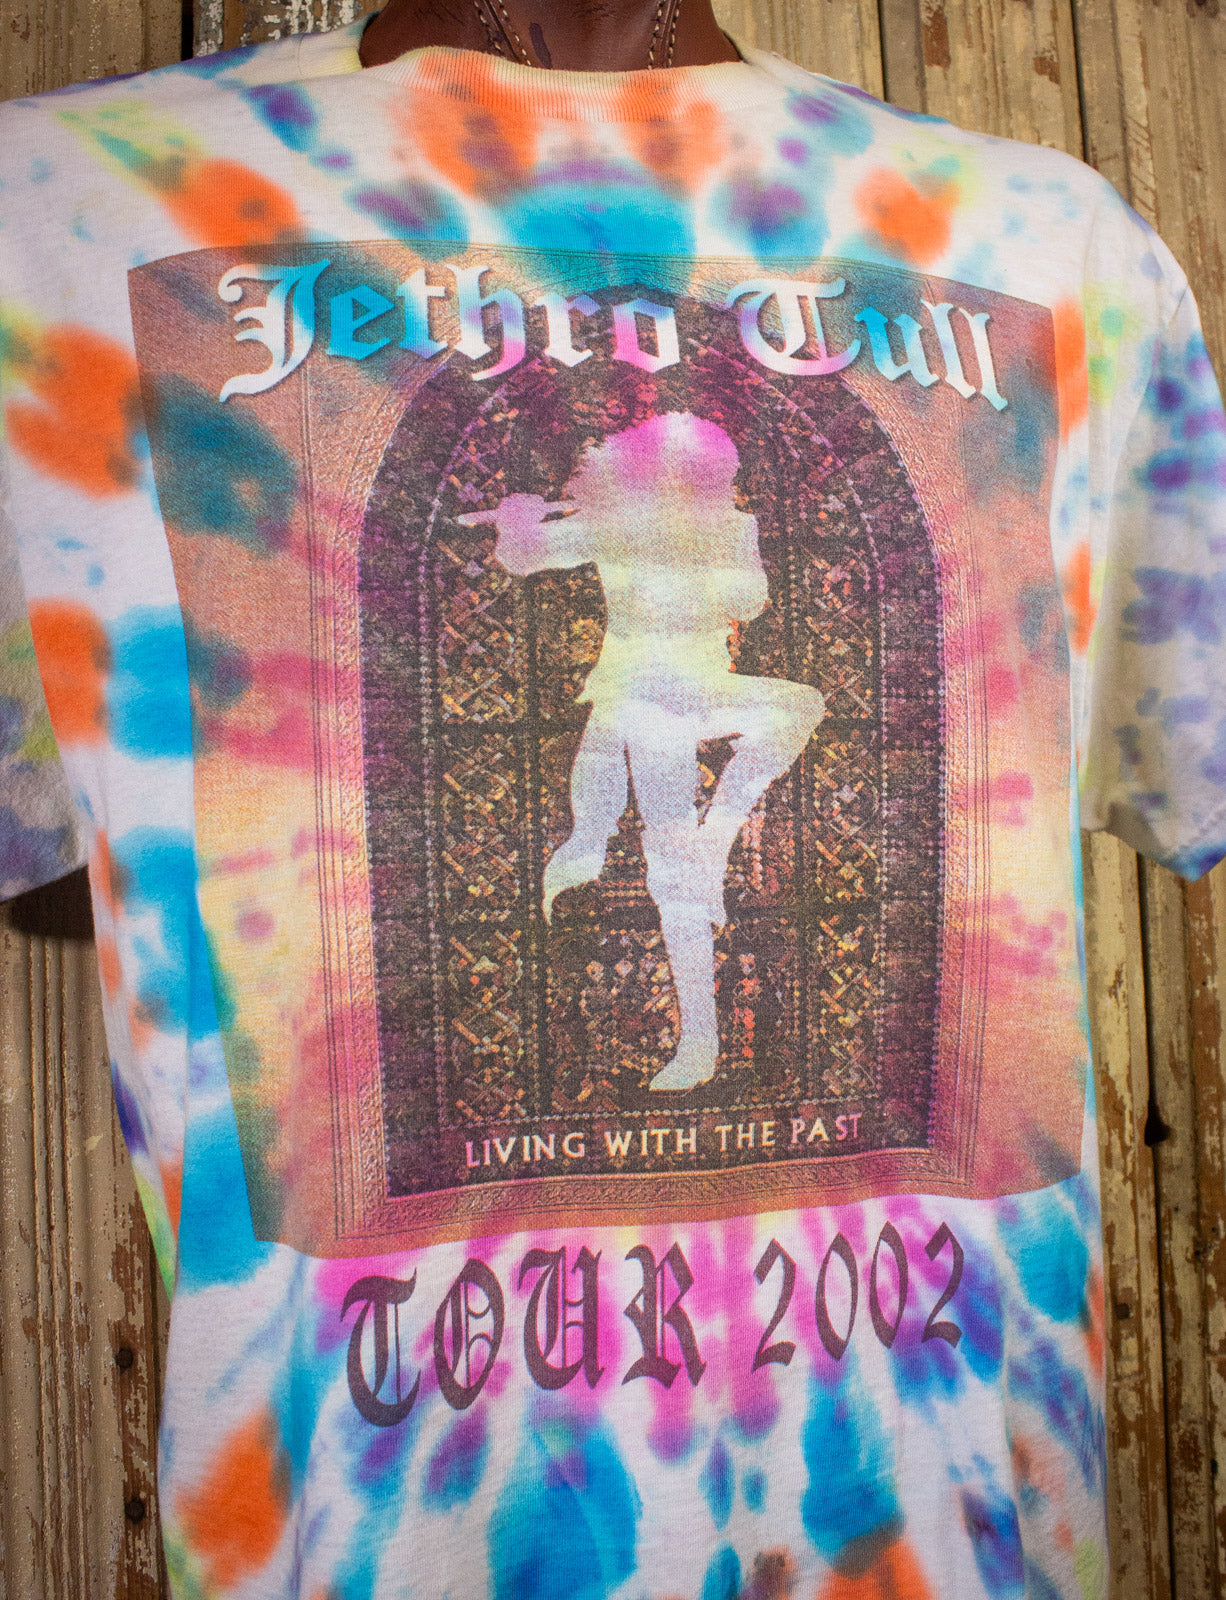 Vintage Jethro Tull Living With The Past Concert T Shirt 2002 Tie Dye XL